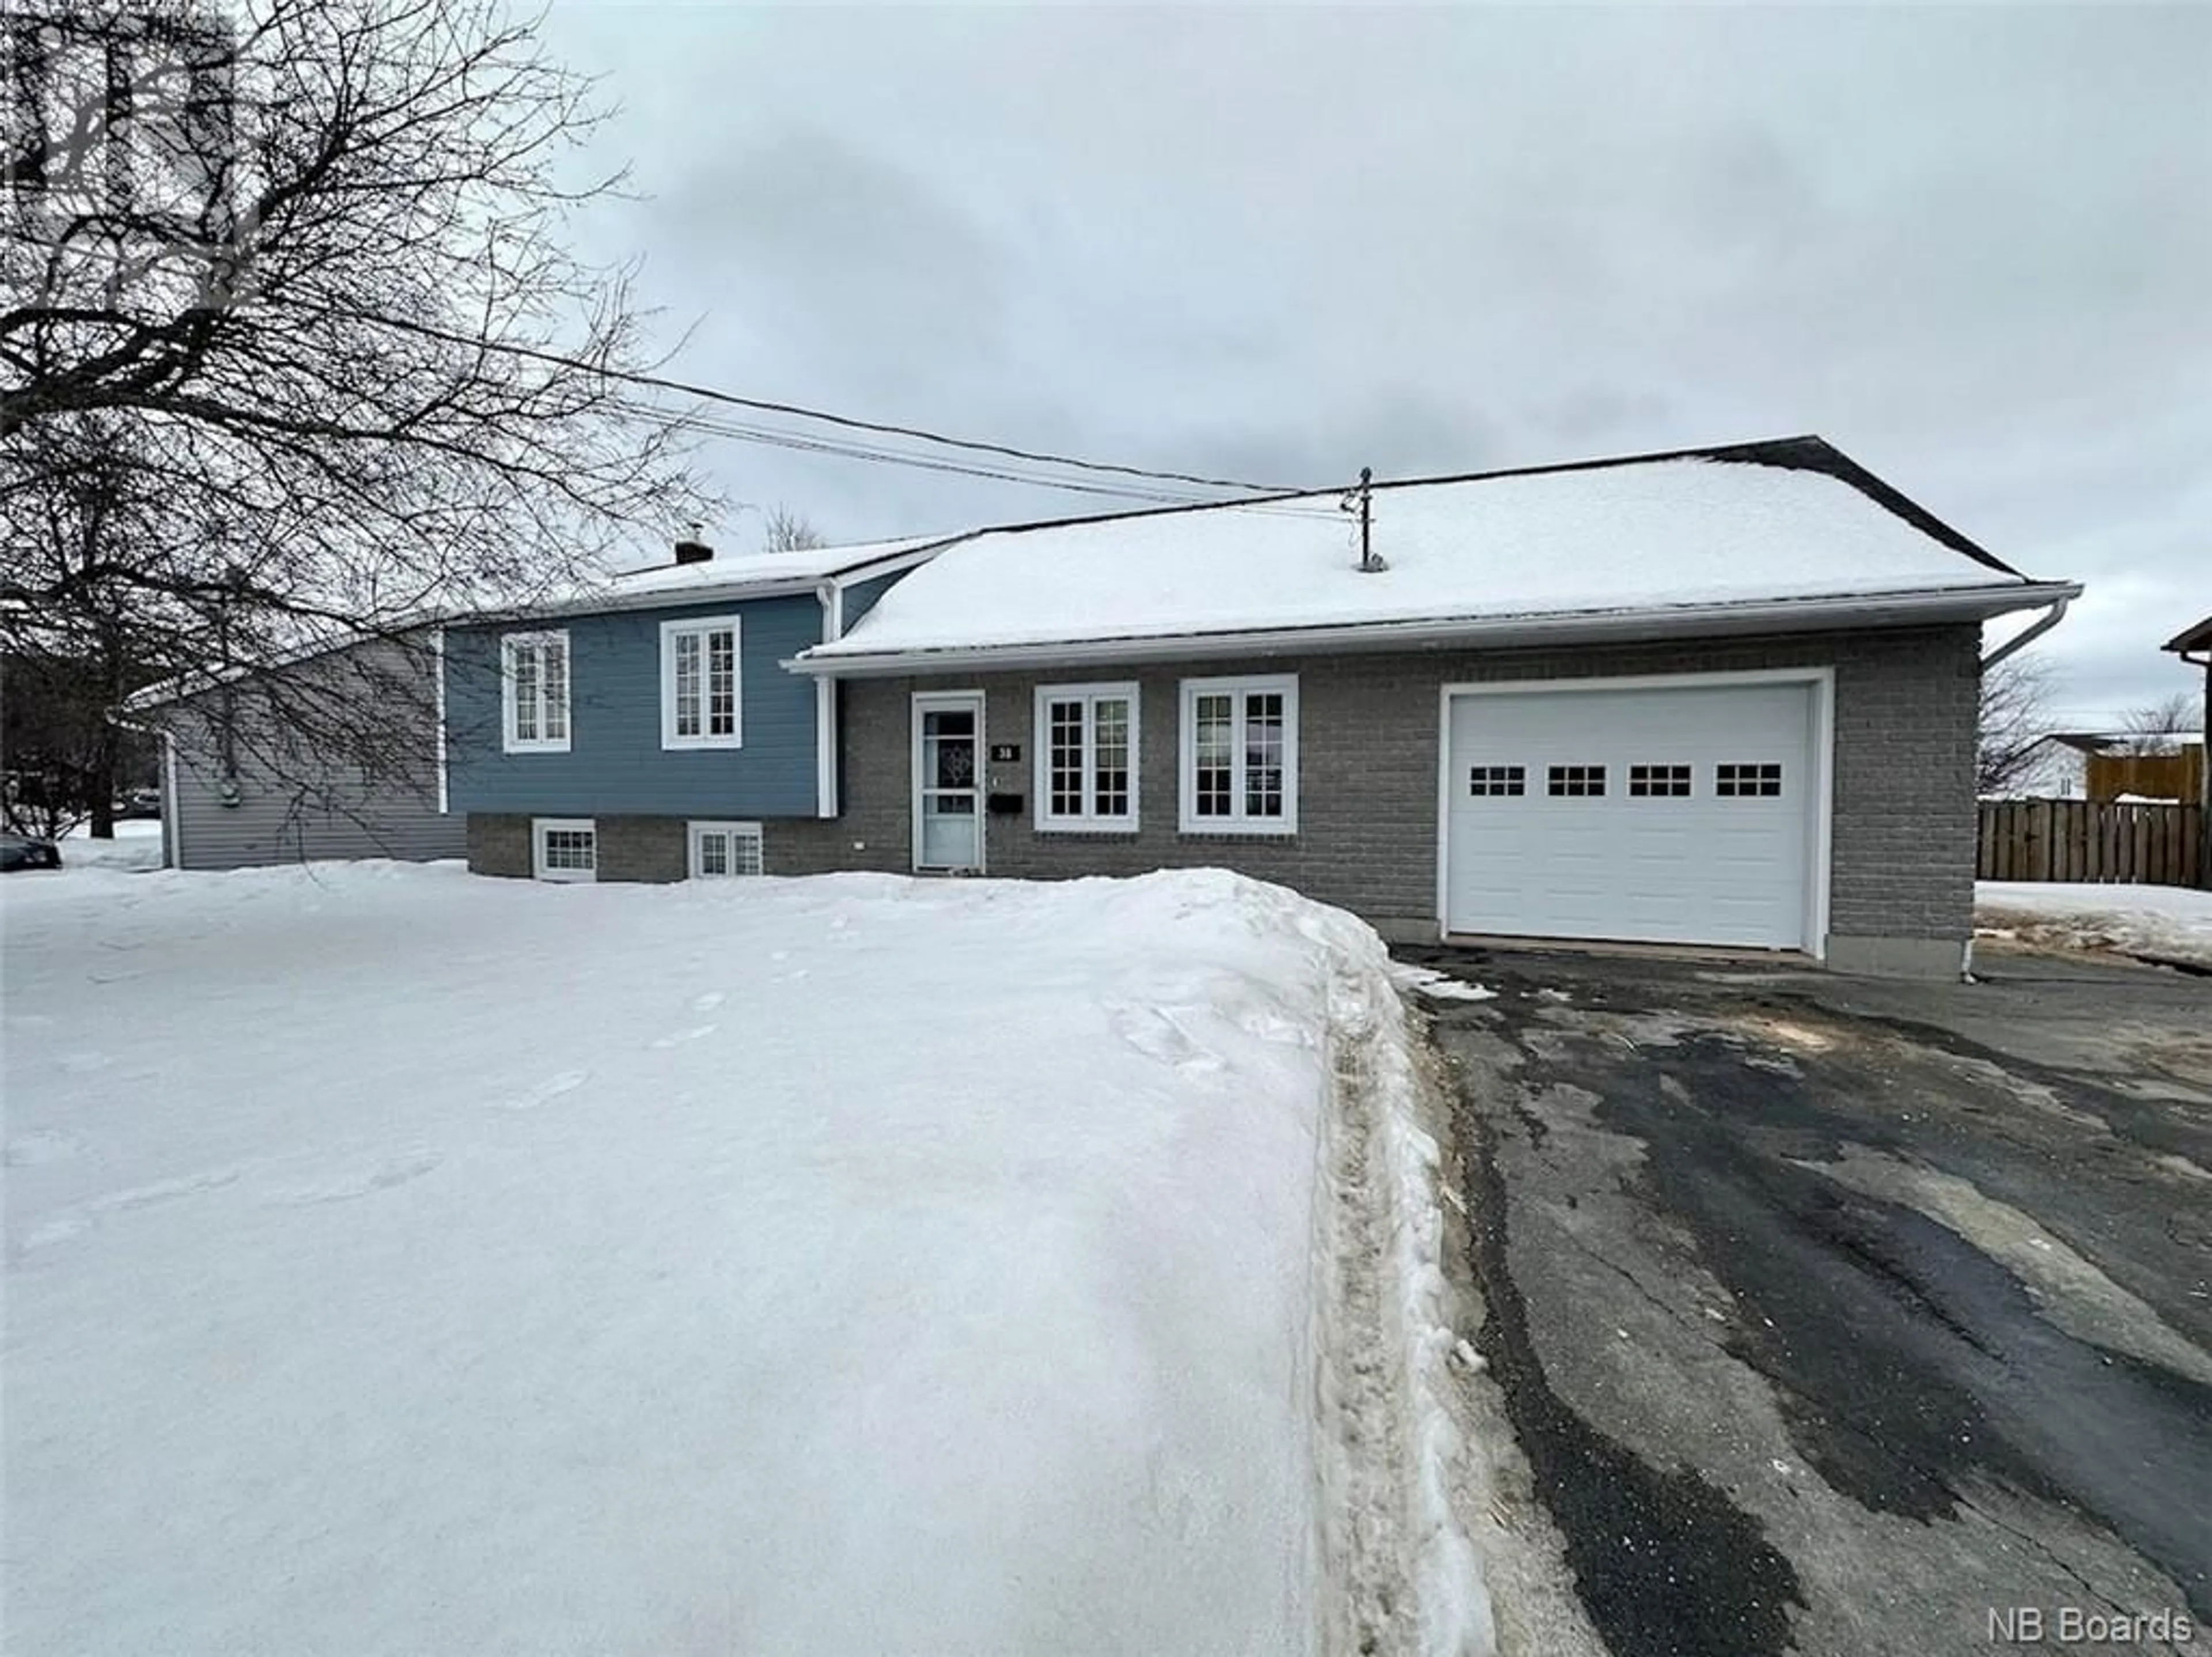 Home with unknown exterior material for 35 Belisle Avenue, Edmundston New Brunswick E3V3W9